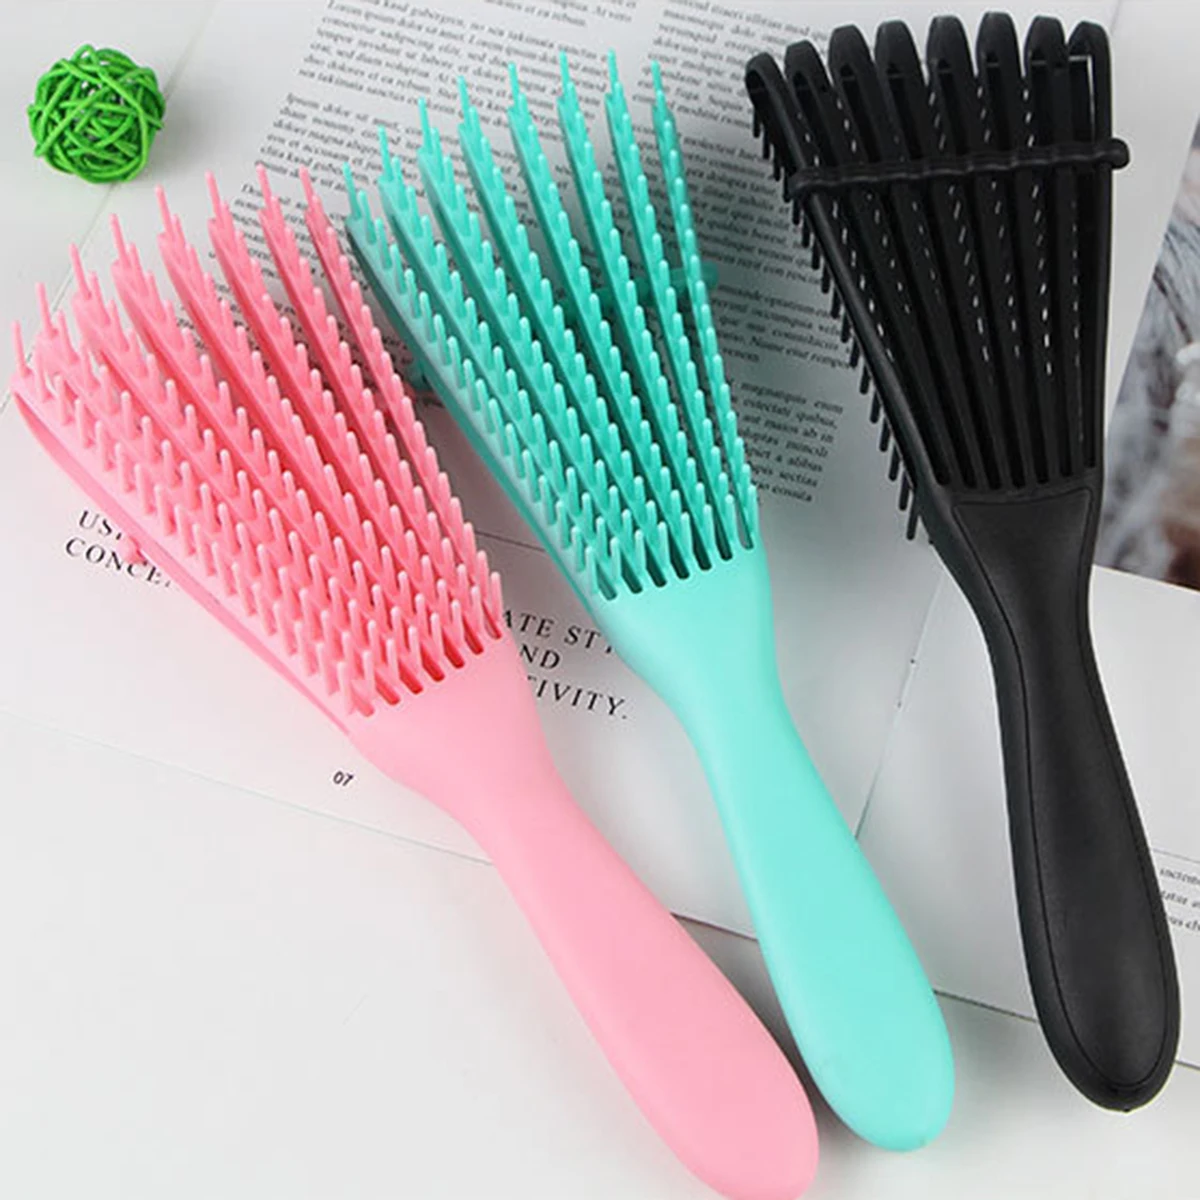 1PC Professional Hair Brush Hair Care Spa Scalp Massage Comb Detangle Hairbrush Comb for Salon Hairdressing Styling Tools